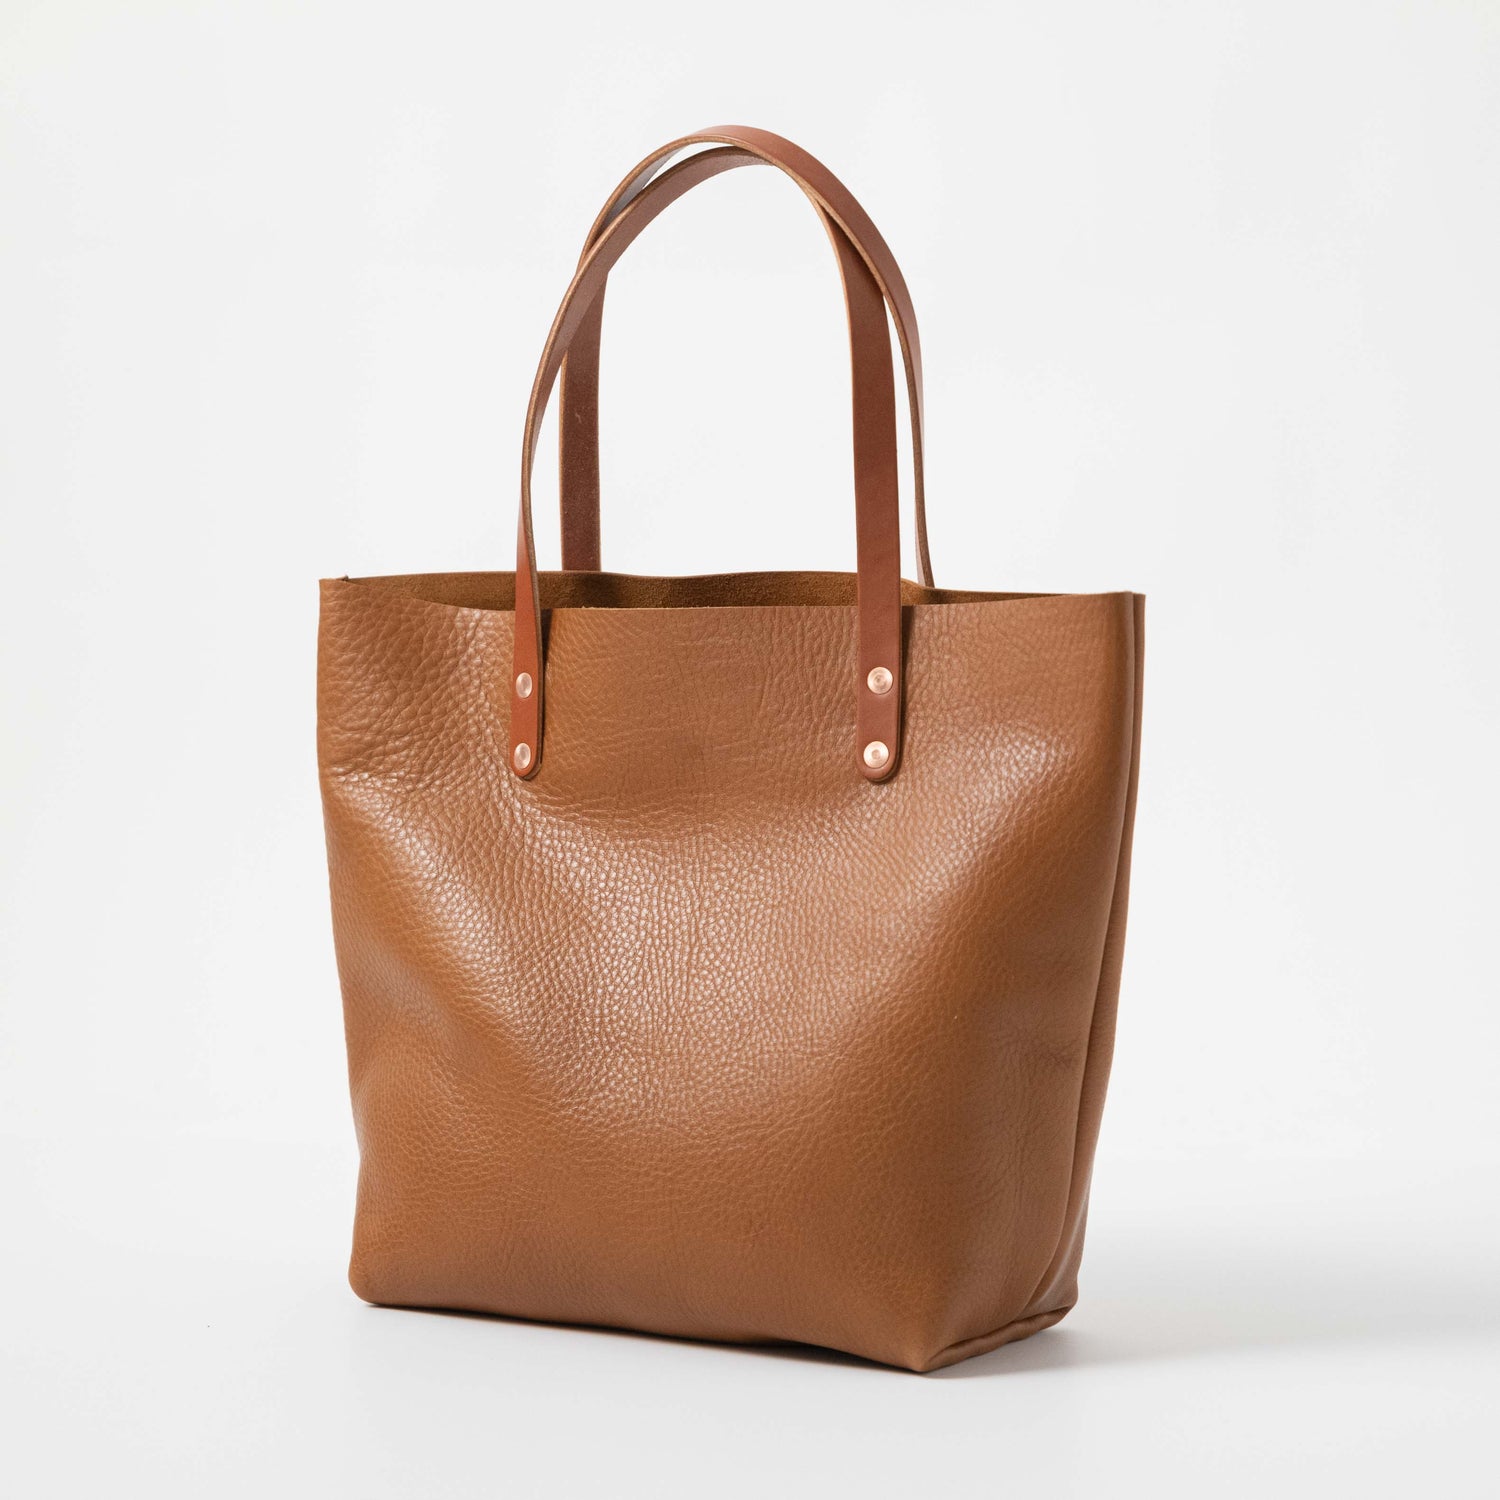 KMM & Co. Cypress Leather Tote Bag